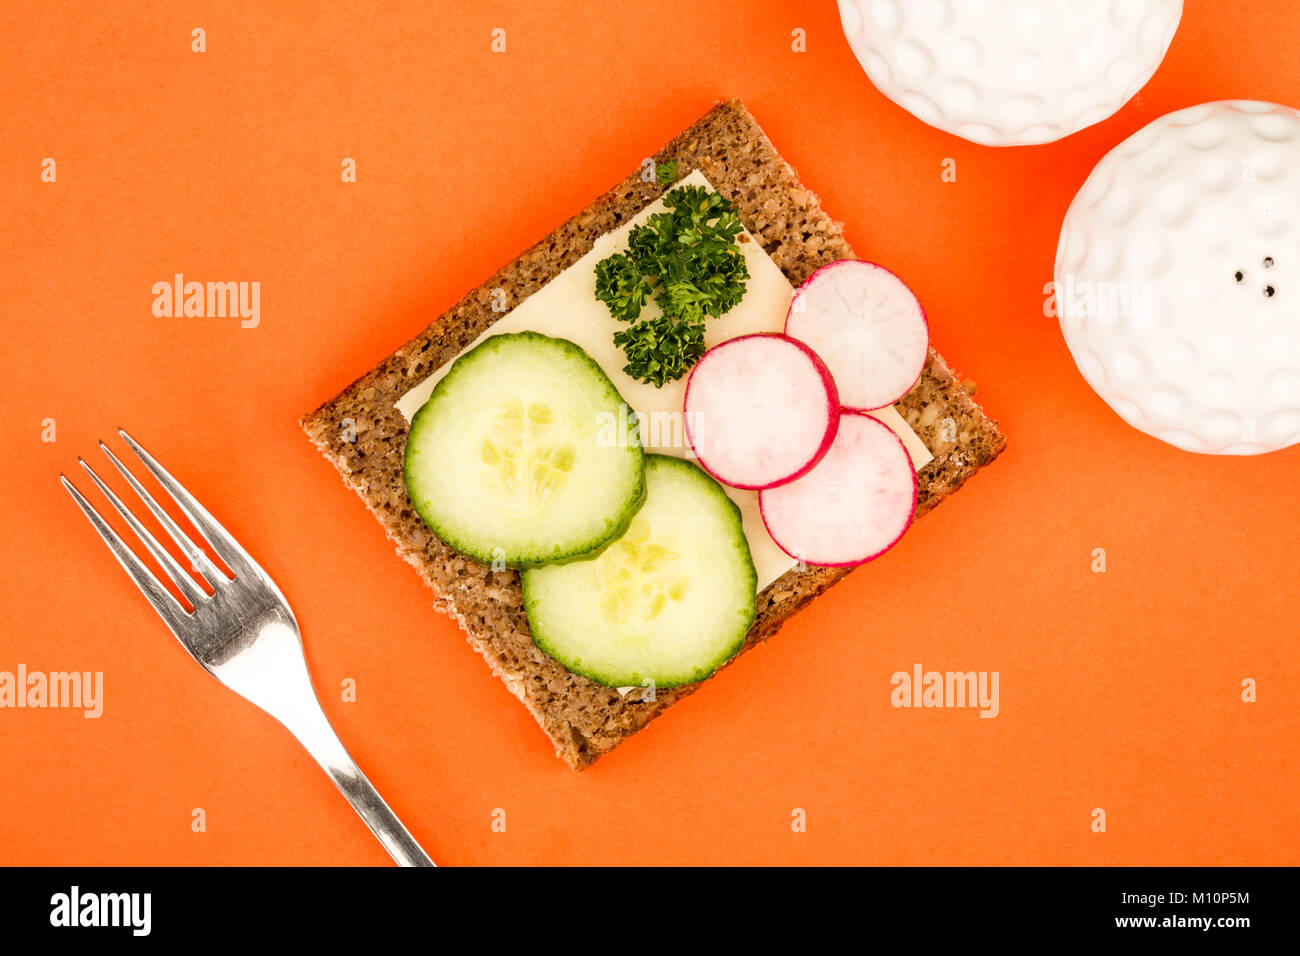 Cheese and Cucumber Open Face Rye Bread Sandwich With Radishes Against An Orange Background Stock Photo